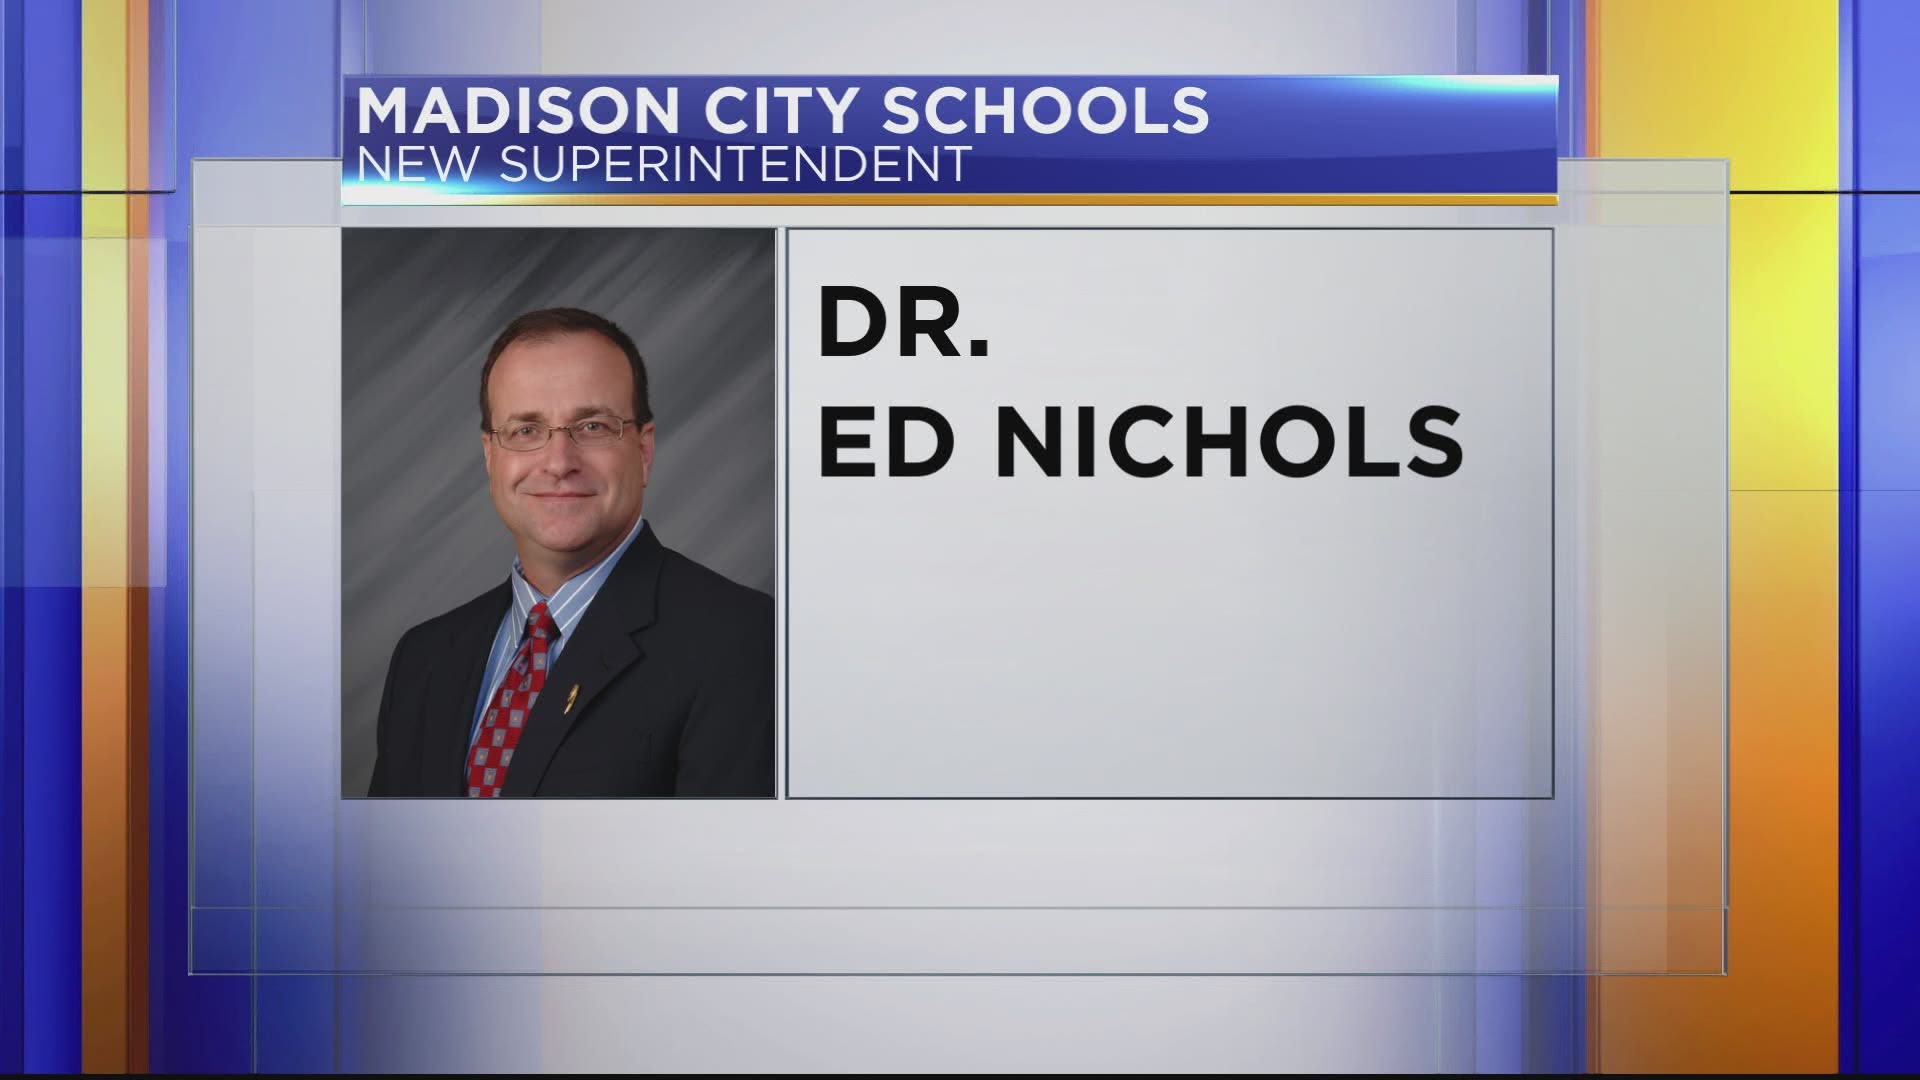 The new superintendent retired as the superintendent of Decatur City Schools in 2016.